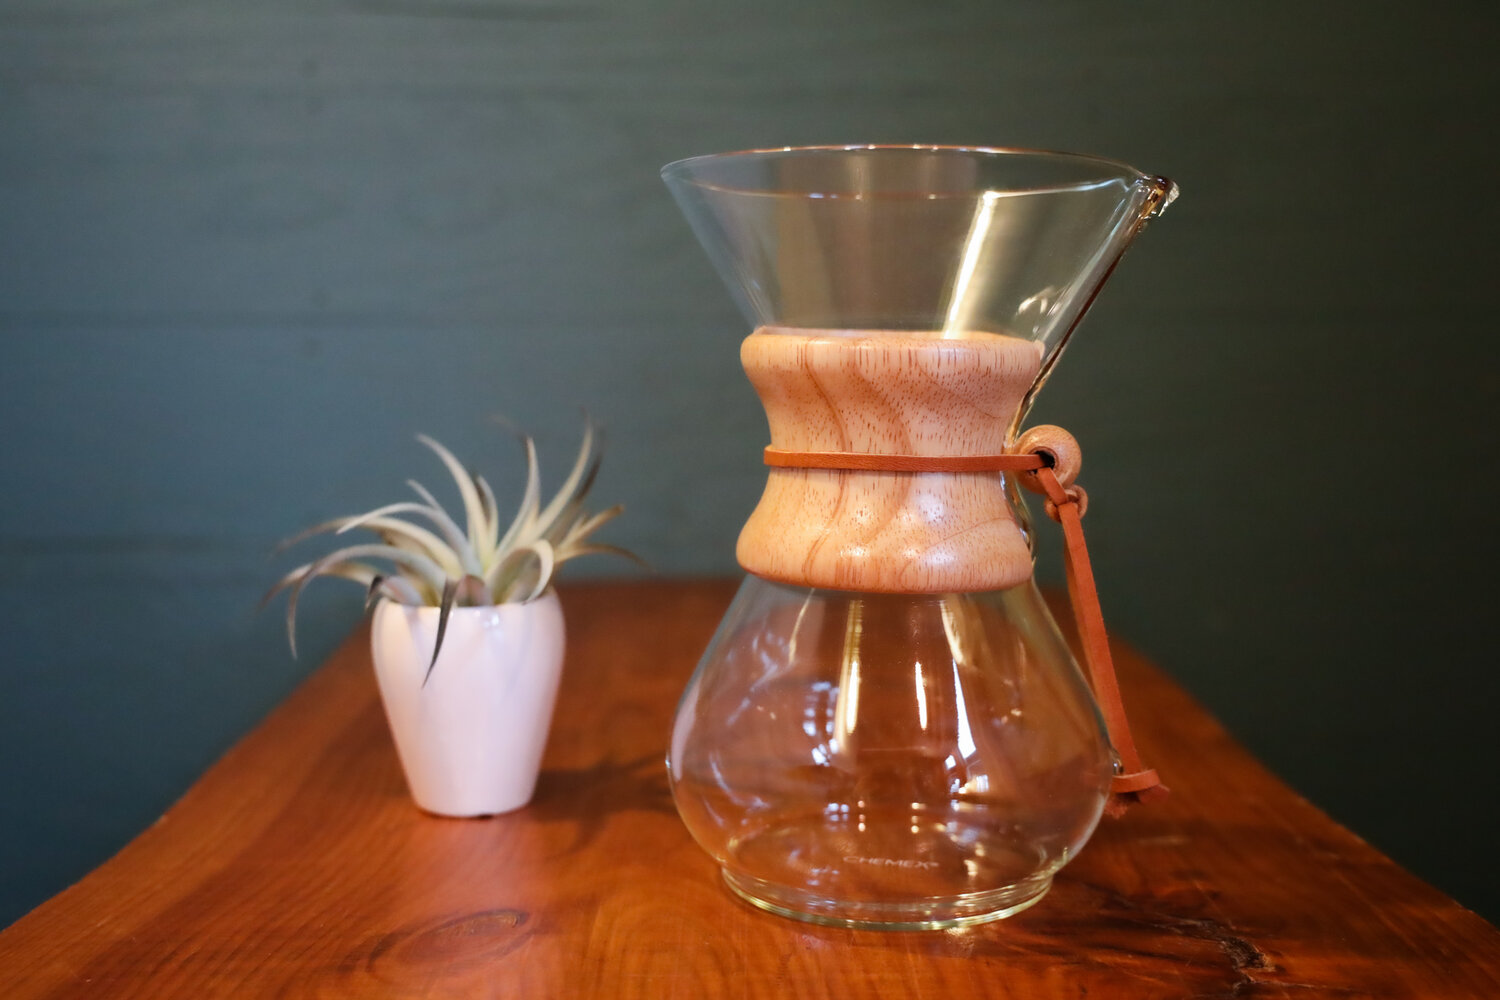 Chemex 6-cup Pour Over Coffee Maker